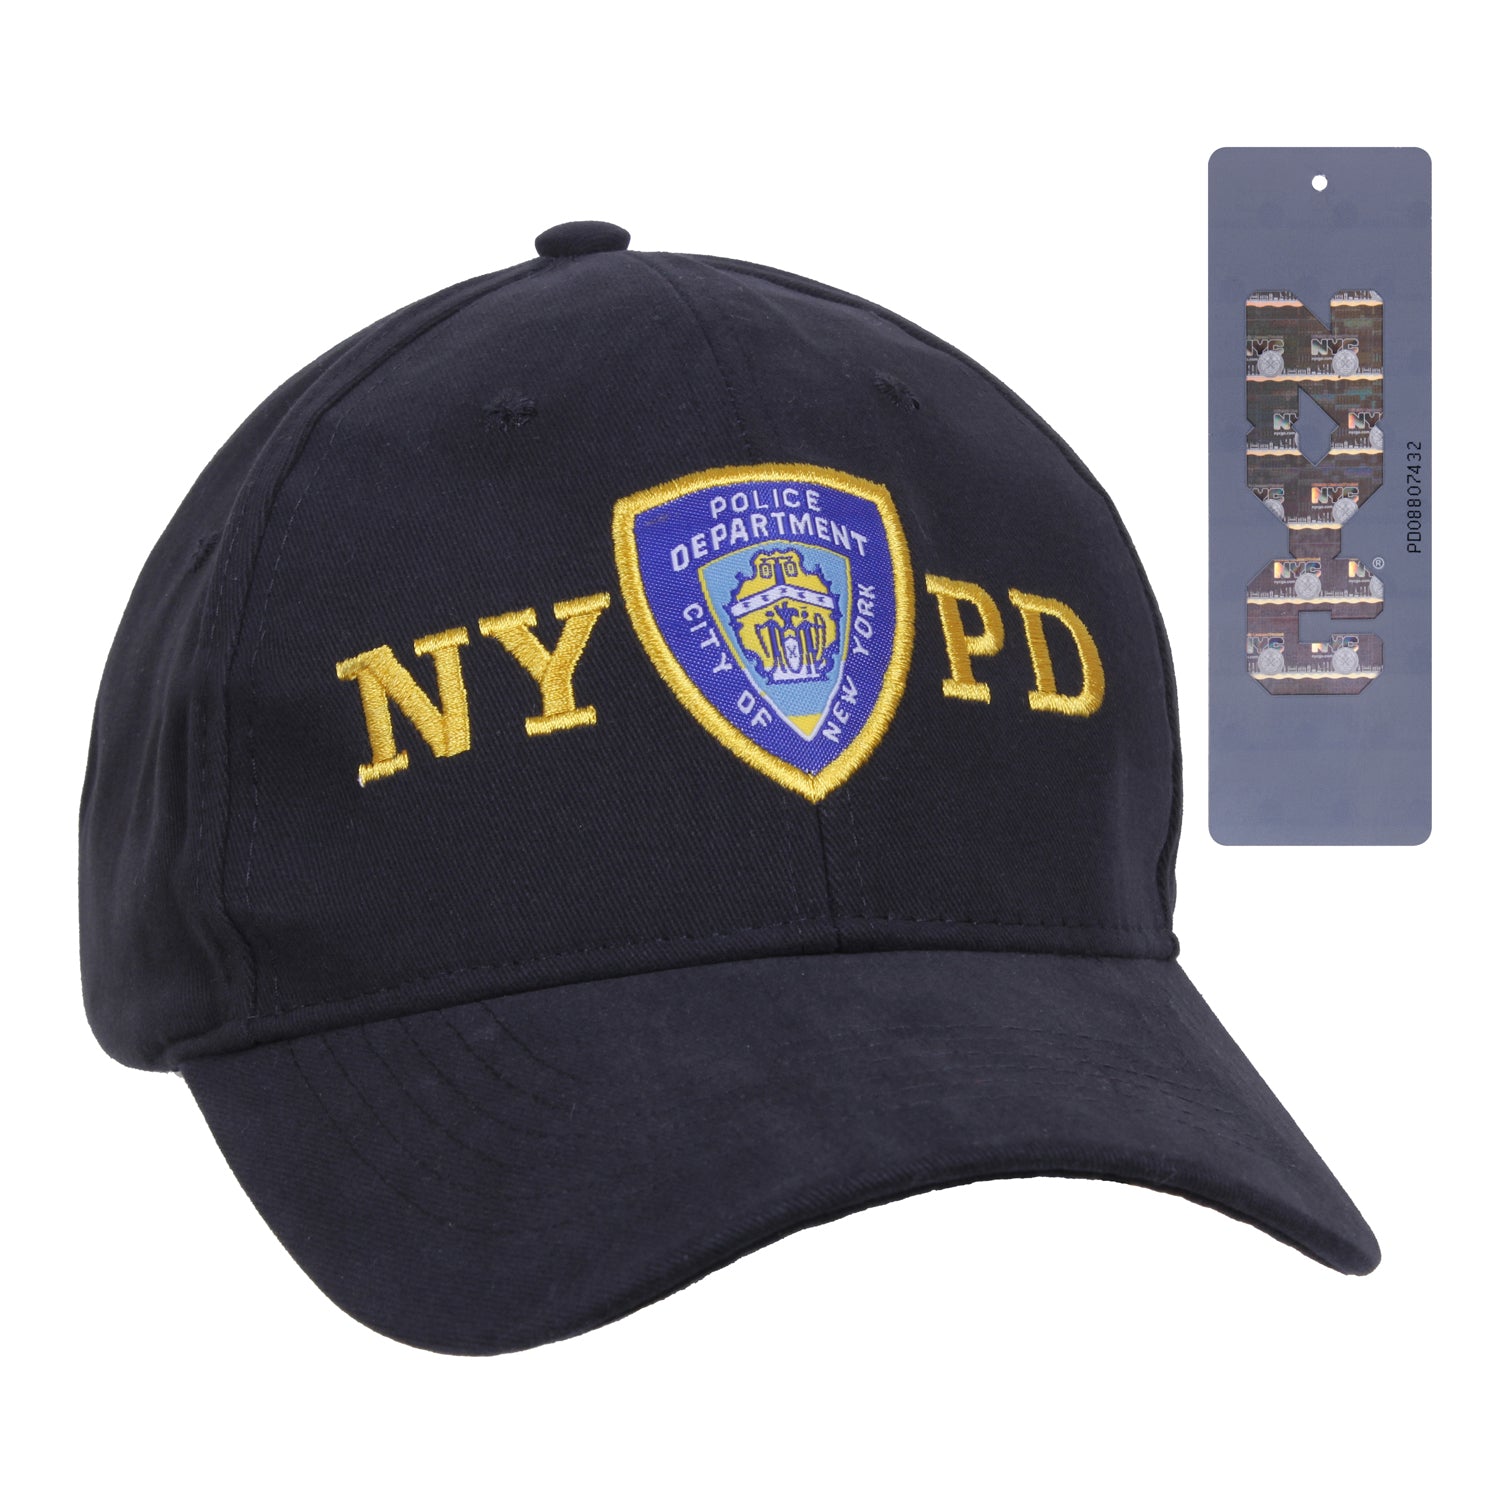 Rothco Officially Licensed NYPD Adjustable Cap With Emblem